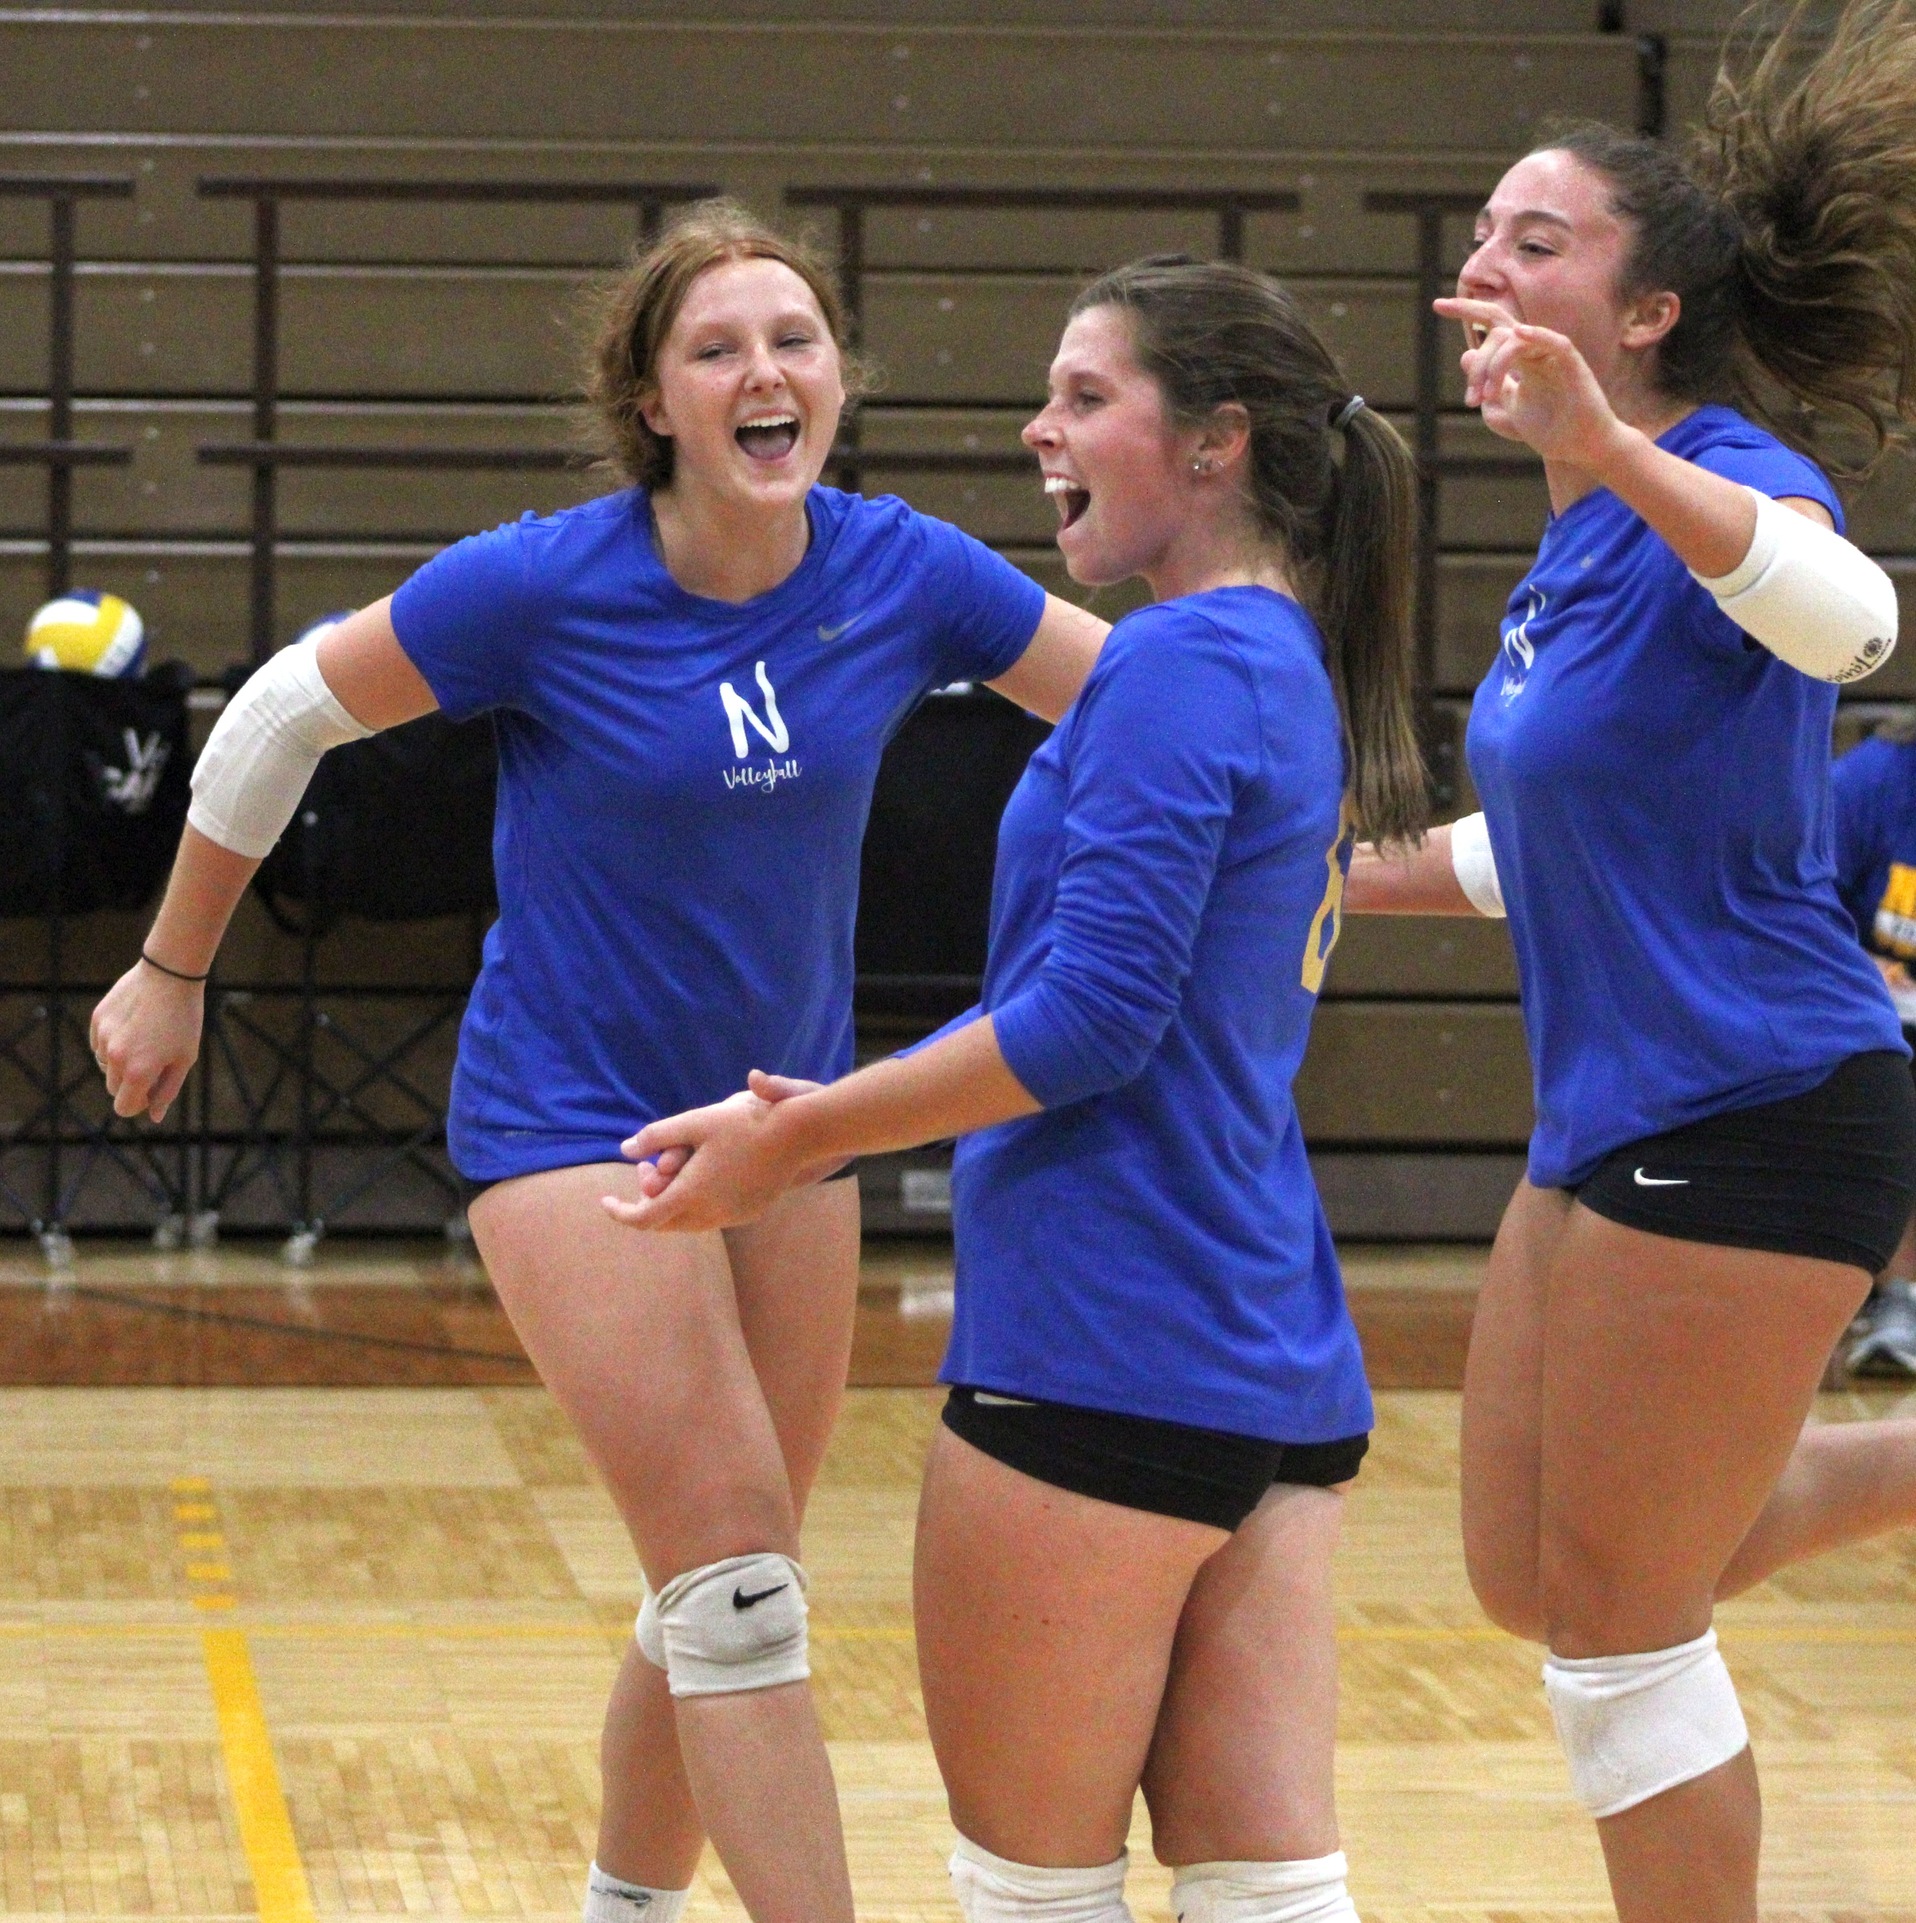 NIACC players celebrate a point in Tuesday's scrimmage against RCTC in the NIACC gym.